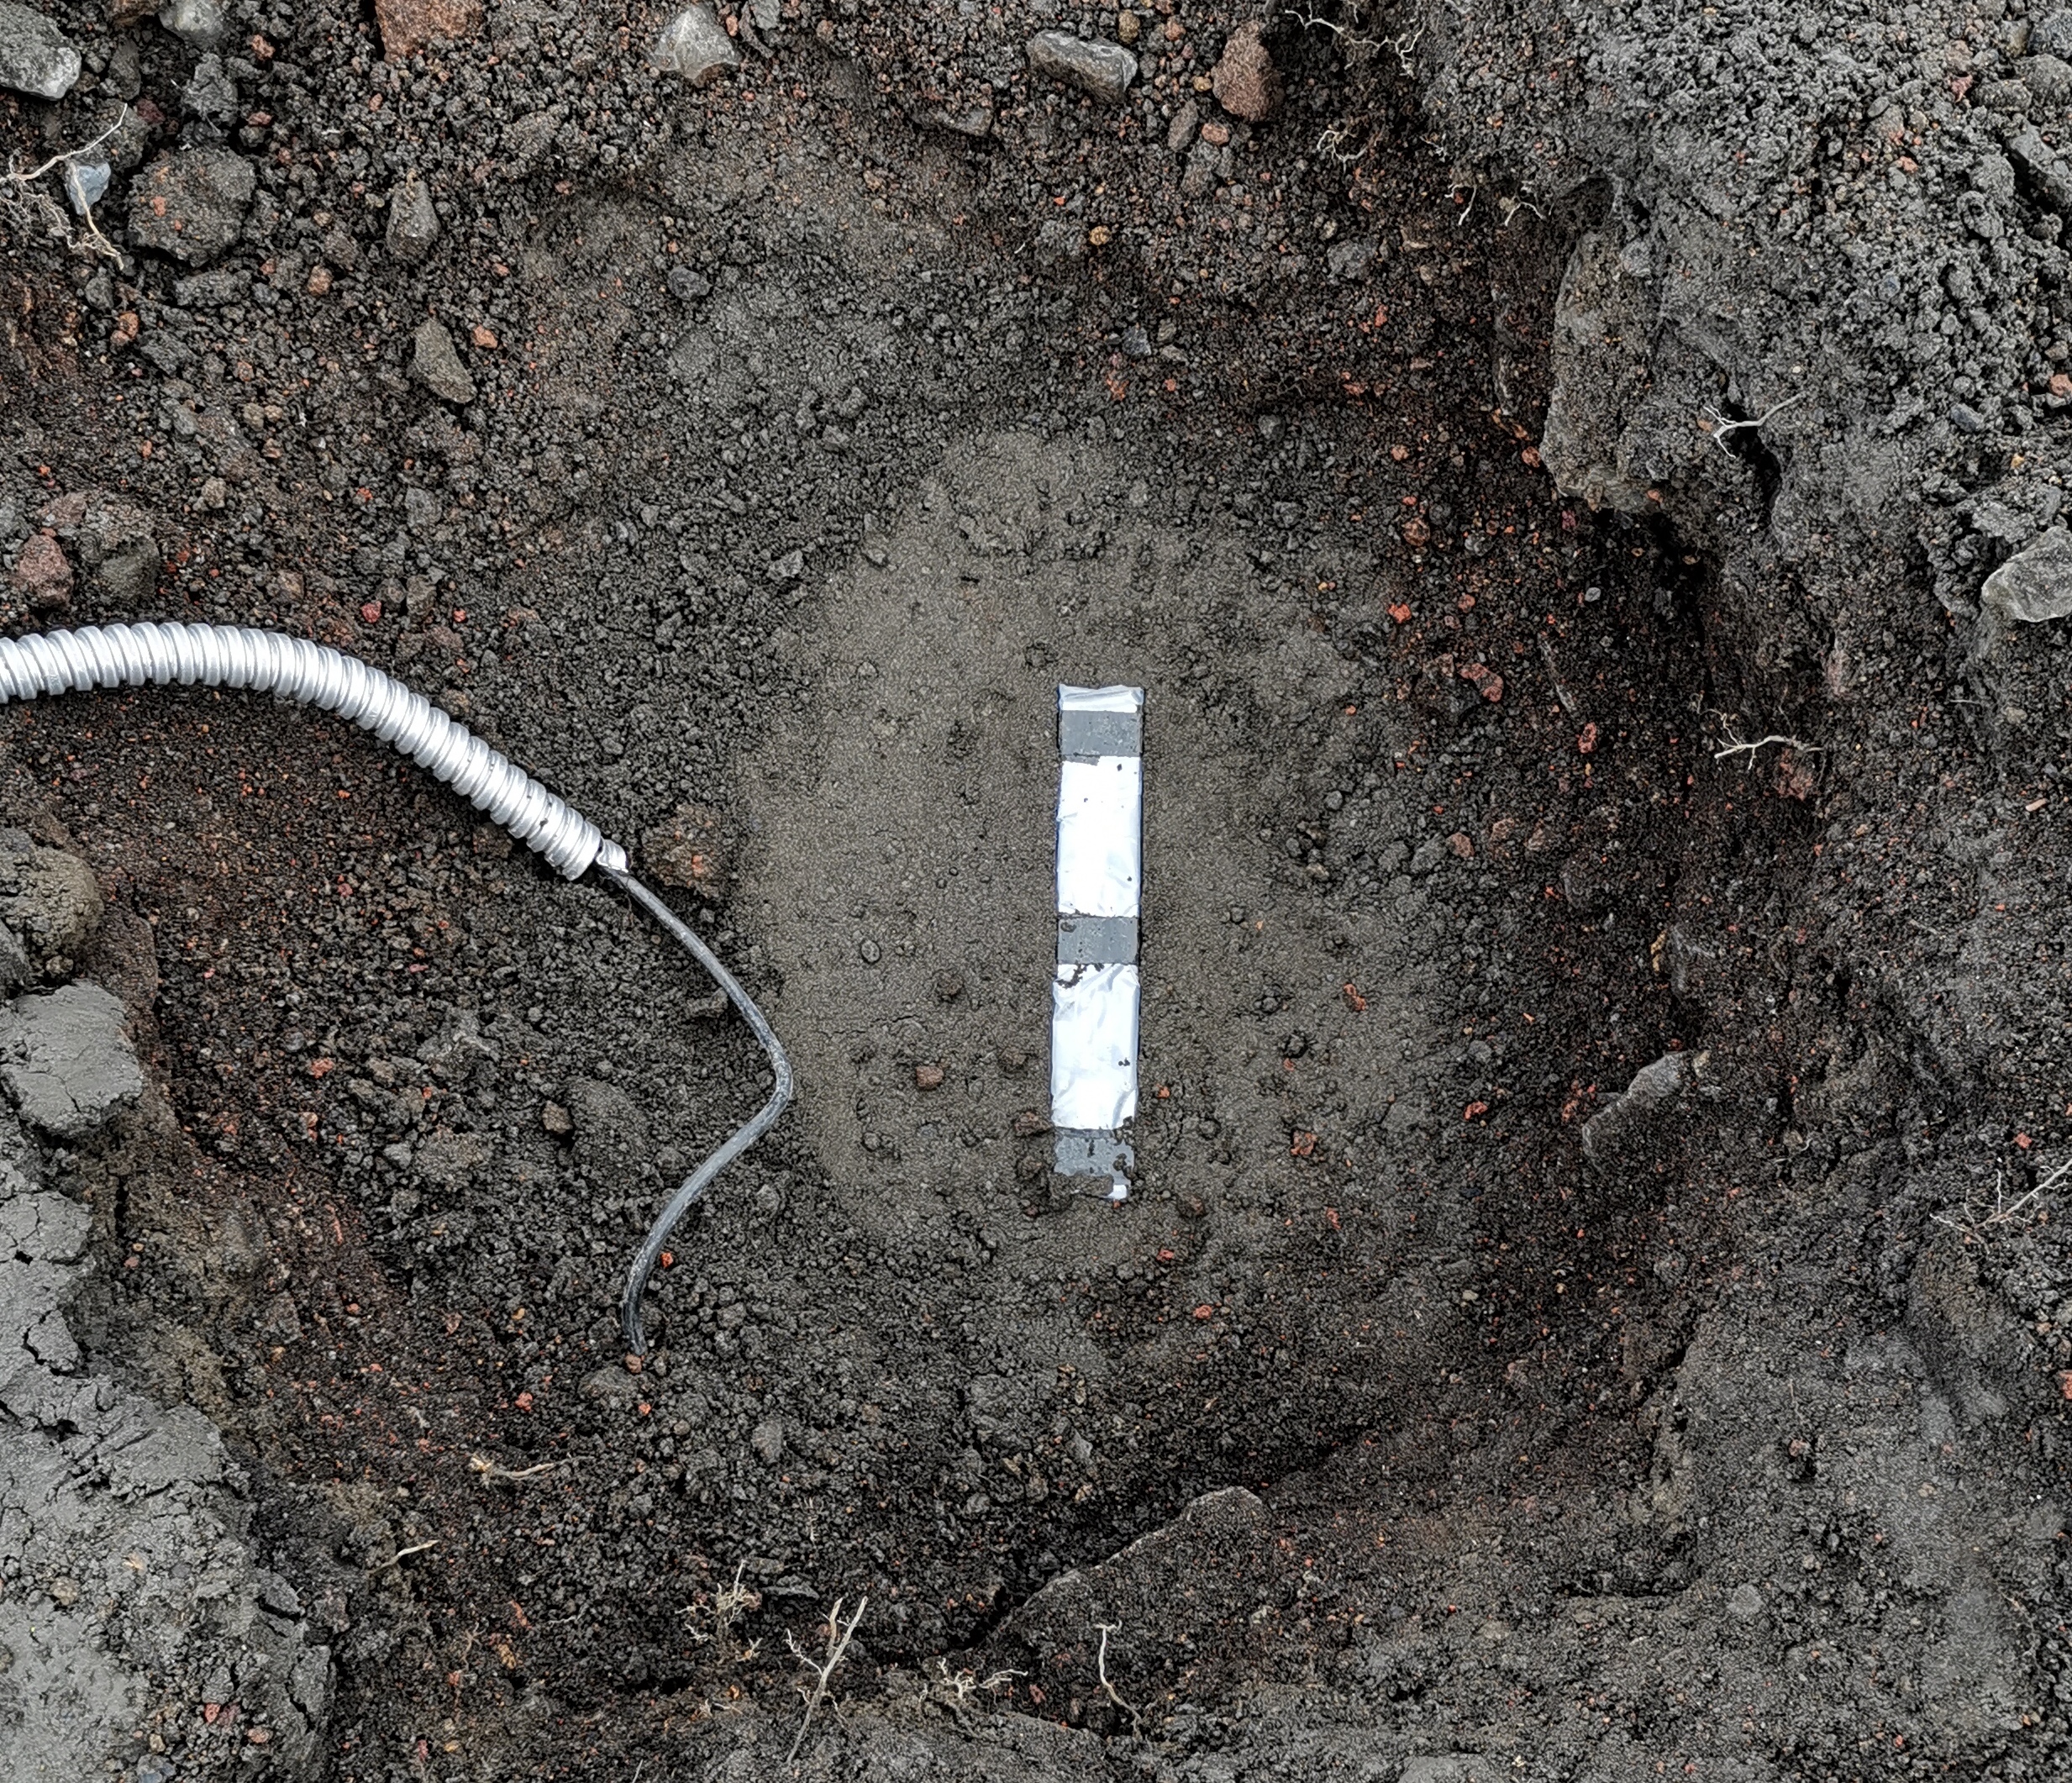 A top-down picture of a magnetometer in the ground. This is a rectangular box with dimensions of around 3 by 3 by 25 cm, surrounded by grainy, ashy, dark grey earth. The power and data cable is seen on the left-hand side going into a protective conduit.